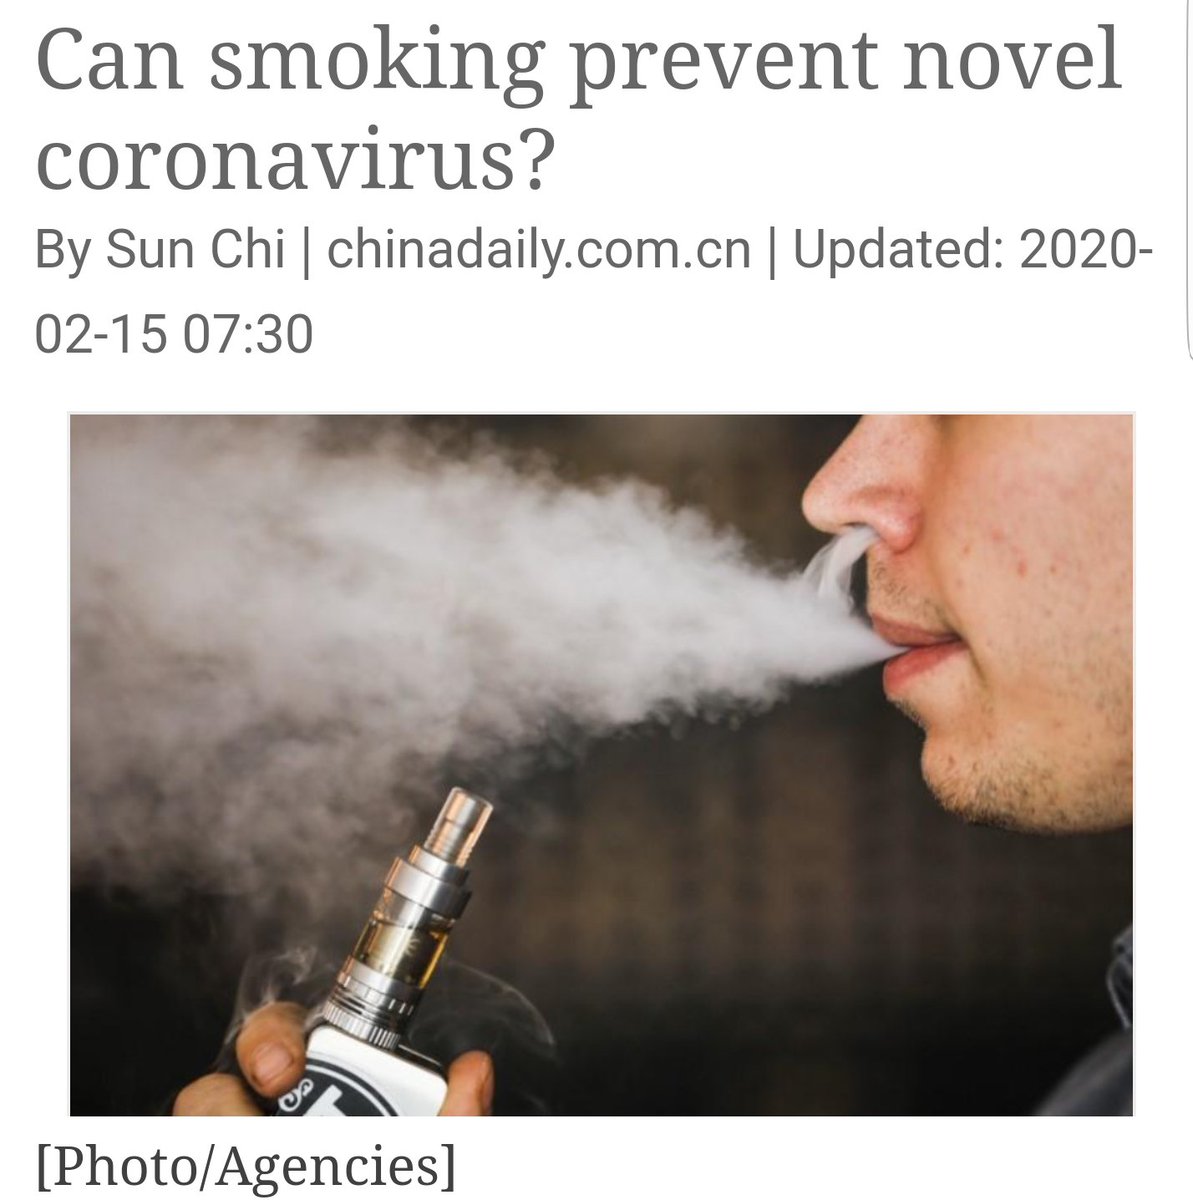 March 23rd warning issued by the WHO saying that tobacco smokers were at severe risk from the coronavirus against a barely noticed article published on 15 February in Communist China titled “Can Smoking Prevent Novel Coronavirus?”. https://www.chinadaily.com.cn/a/202002/15/WS5e472d79a310128217277b8e.html